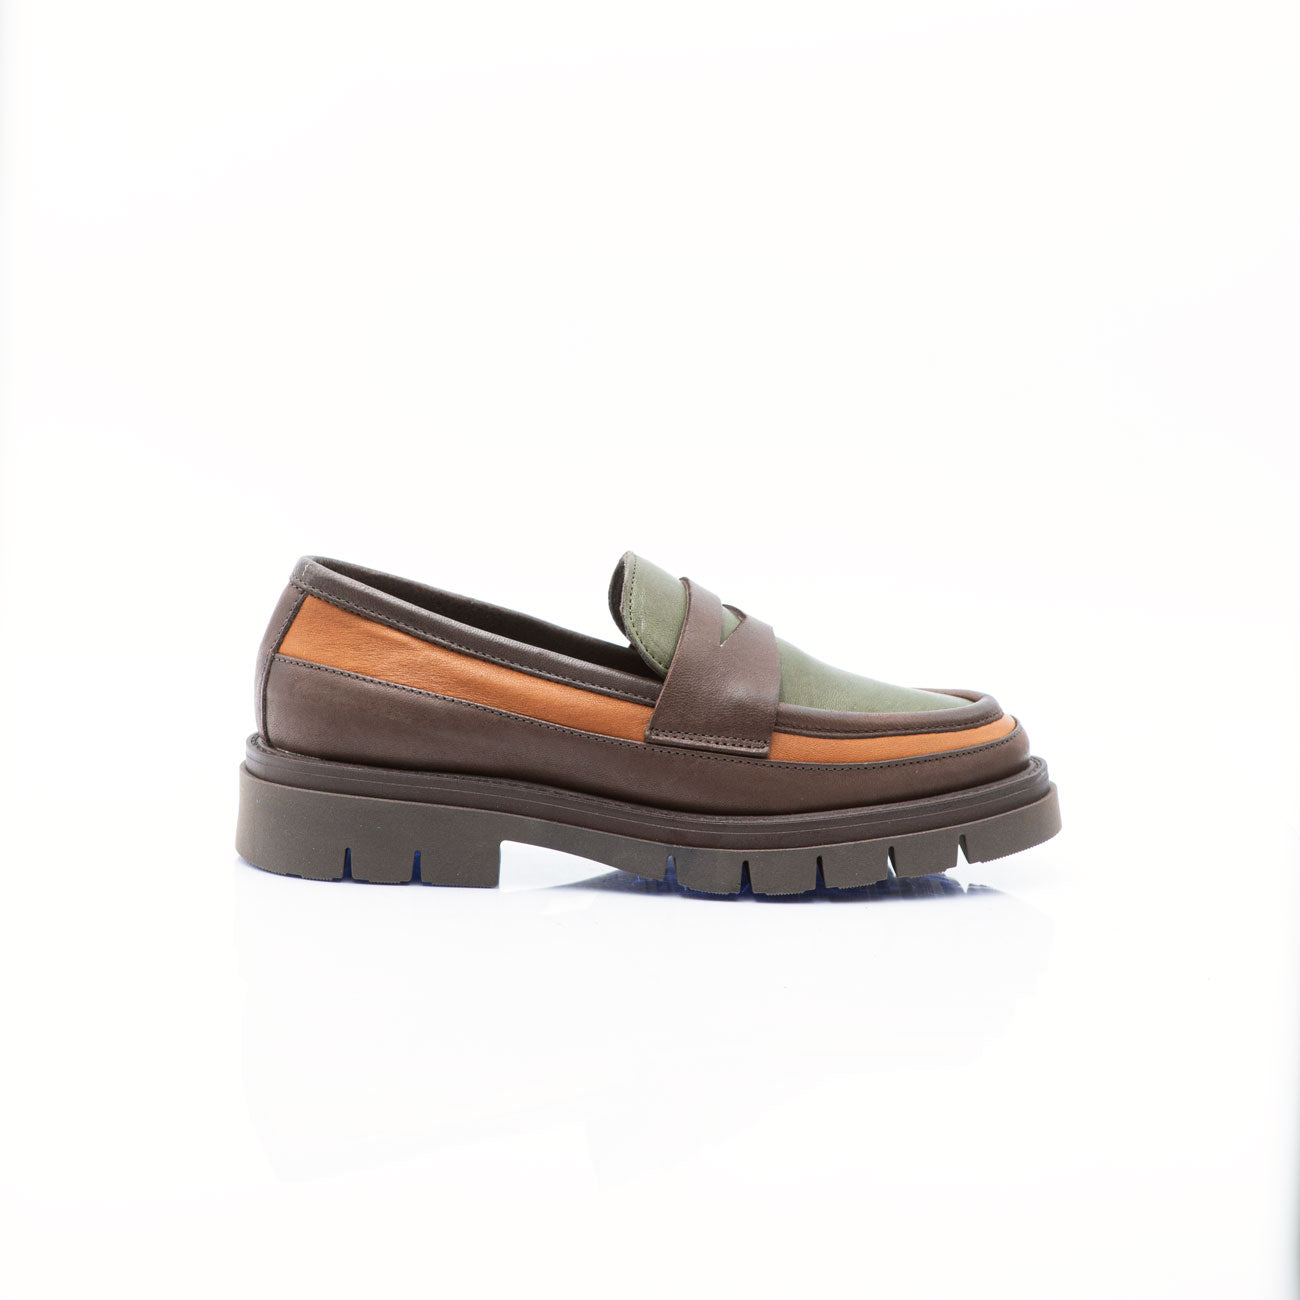 Figini- Three colors Loafer, Brown Green and Leather color